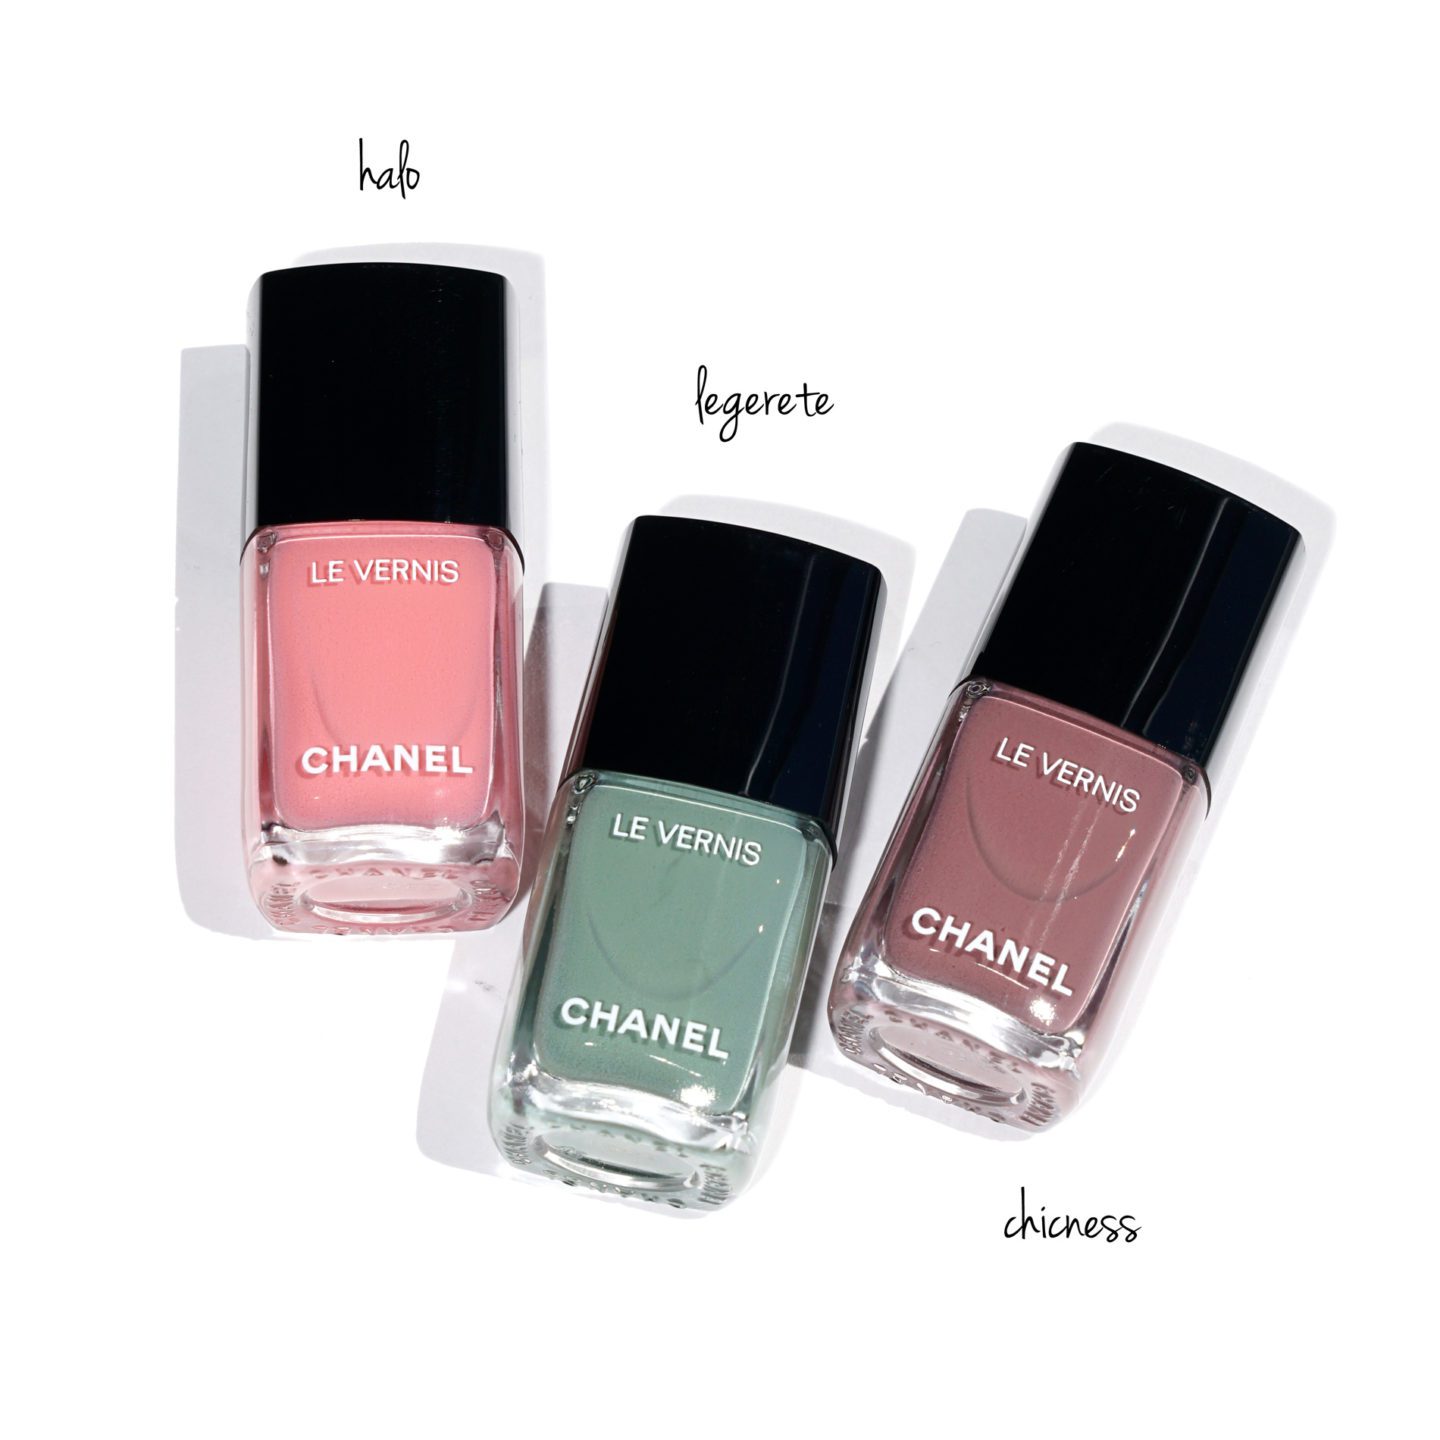 Chanel Cruise Le Vernis Halo, Legerete and Chicness